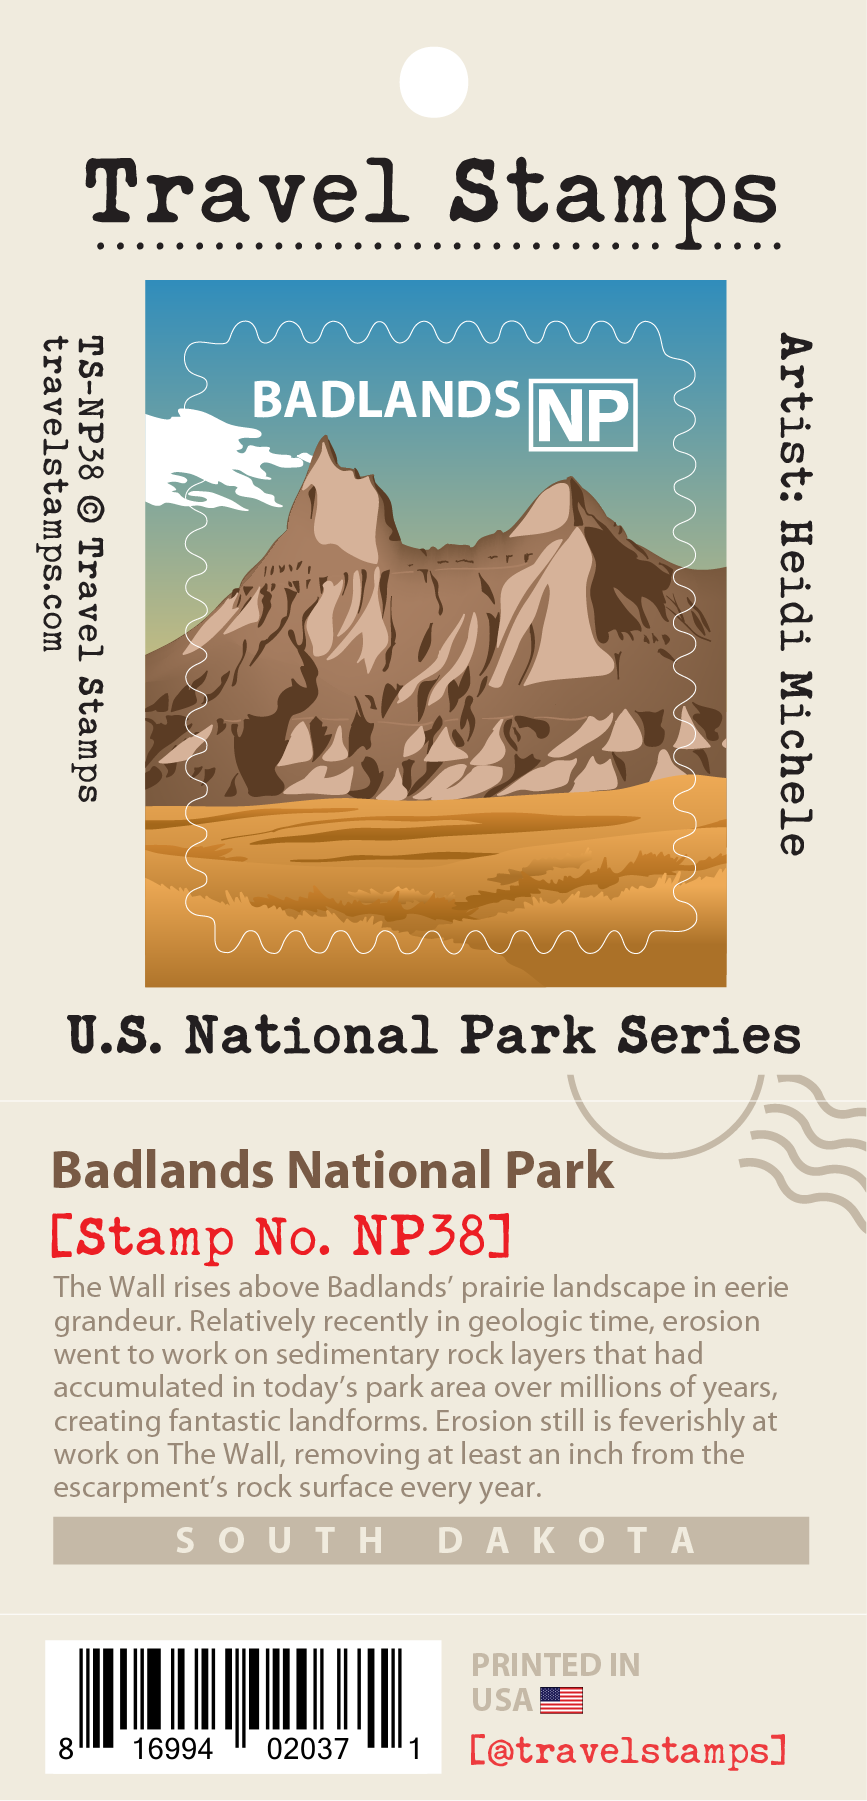 U.S. National Park Album & Guide (3rd Edition) – Travel Stamps